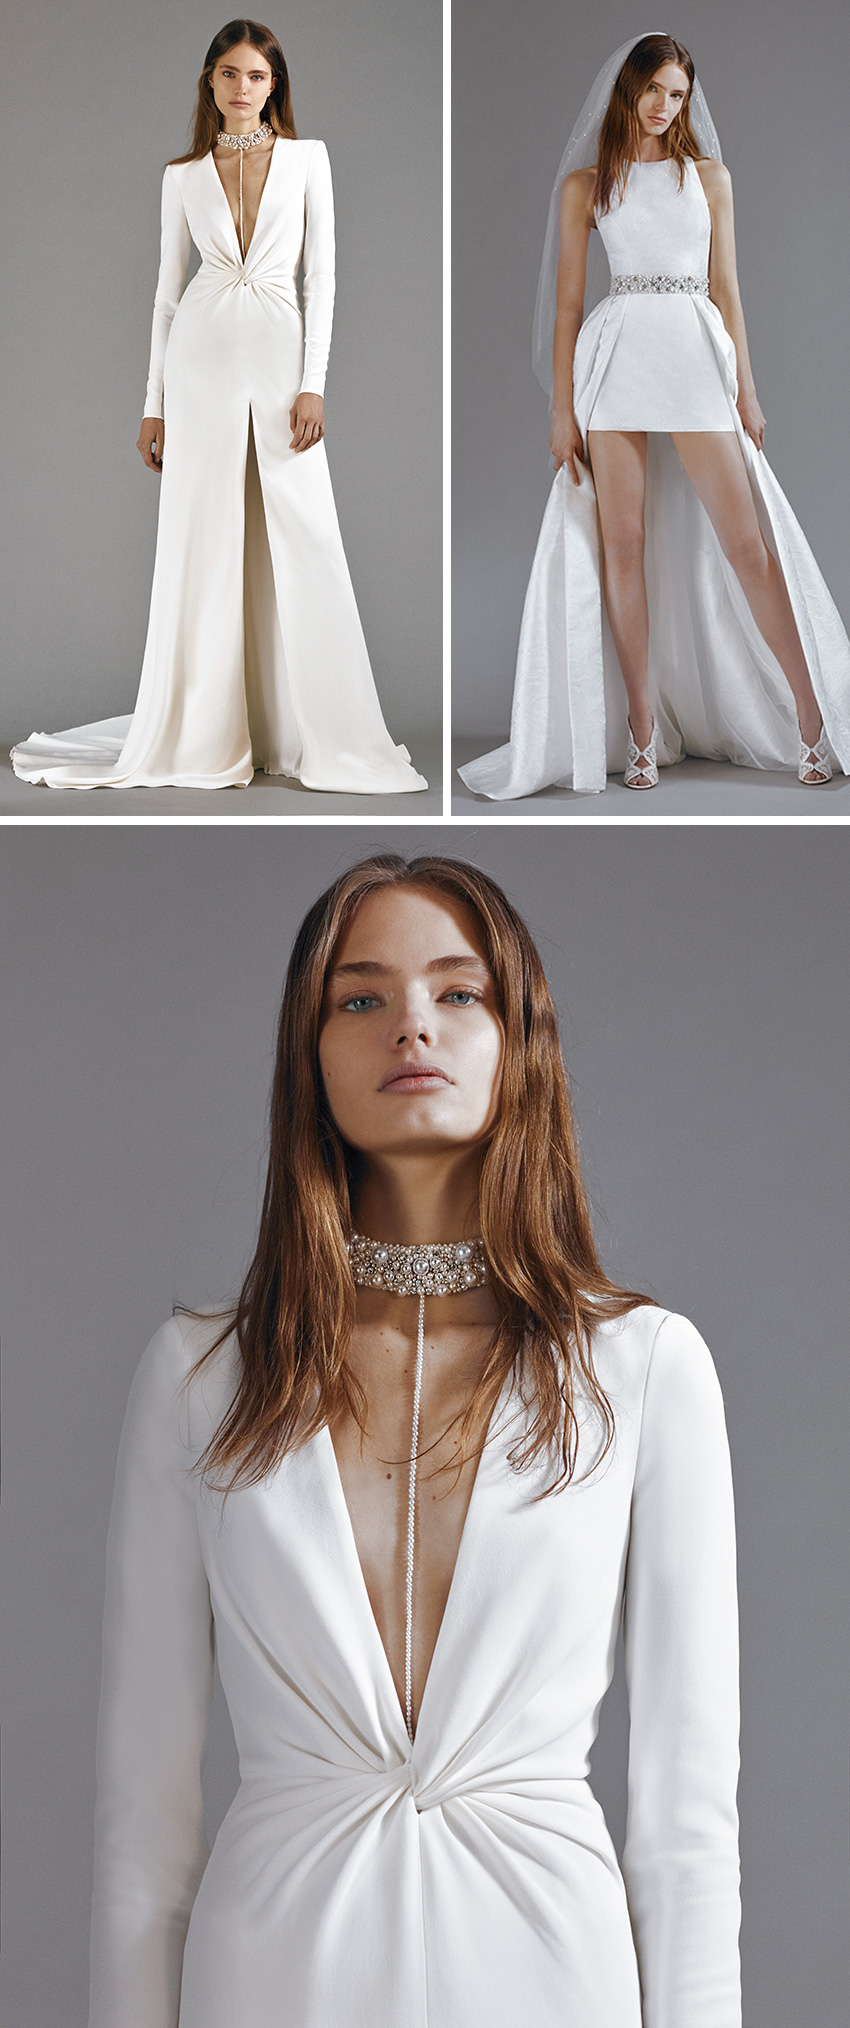 Galia Lahav Pret-a-Porter bridal capsule collection includes sexy silhouettes in luxe fabrics featured in Perfect Wedding Magazine